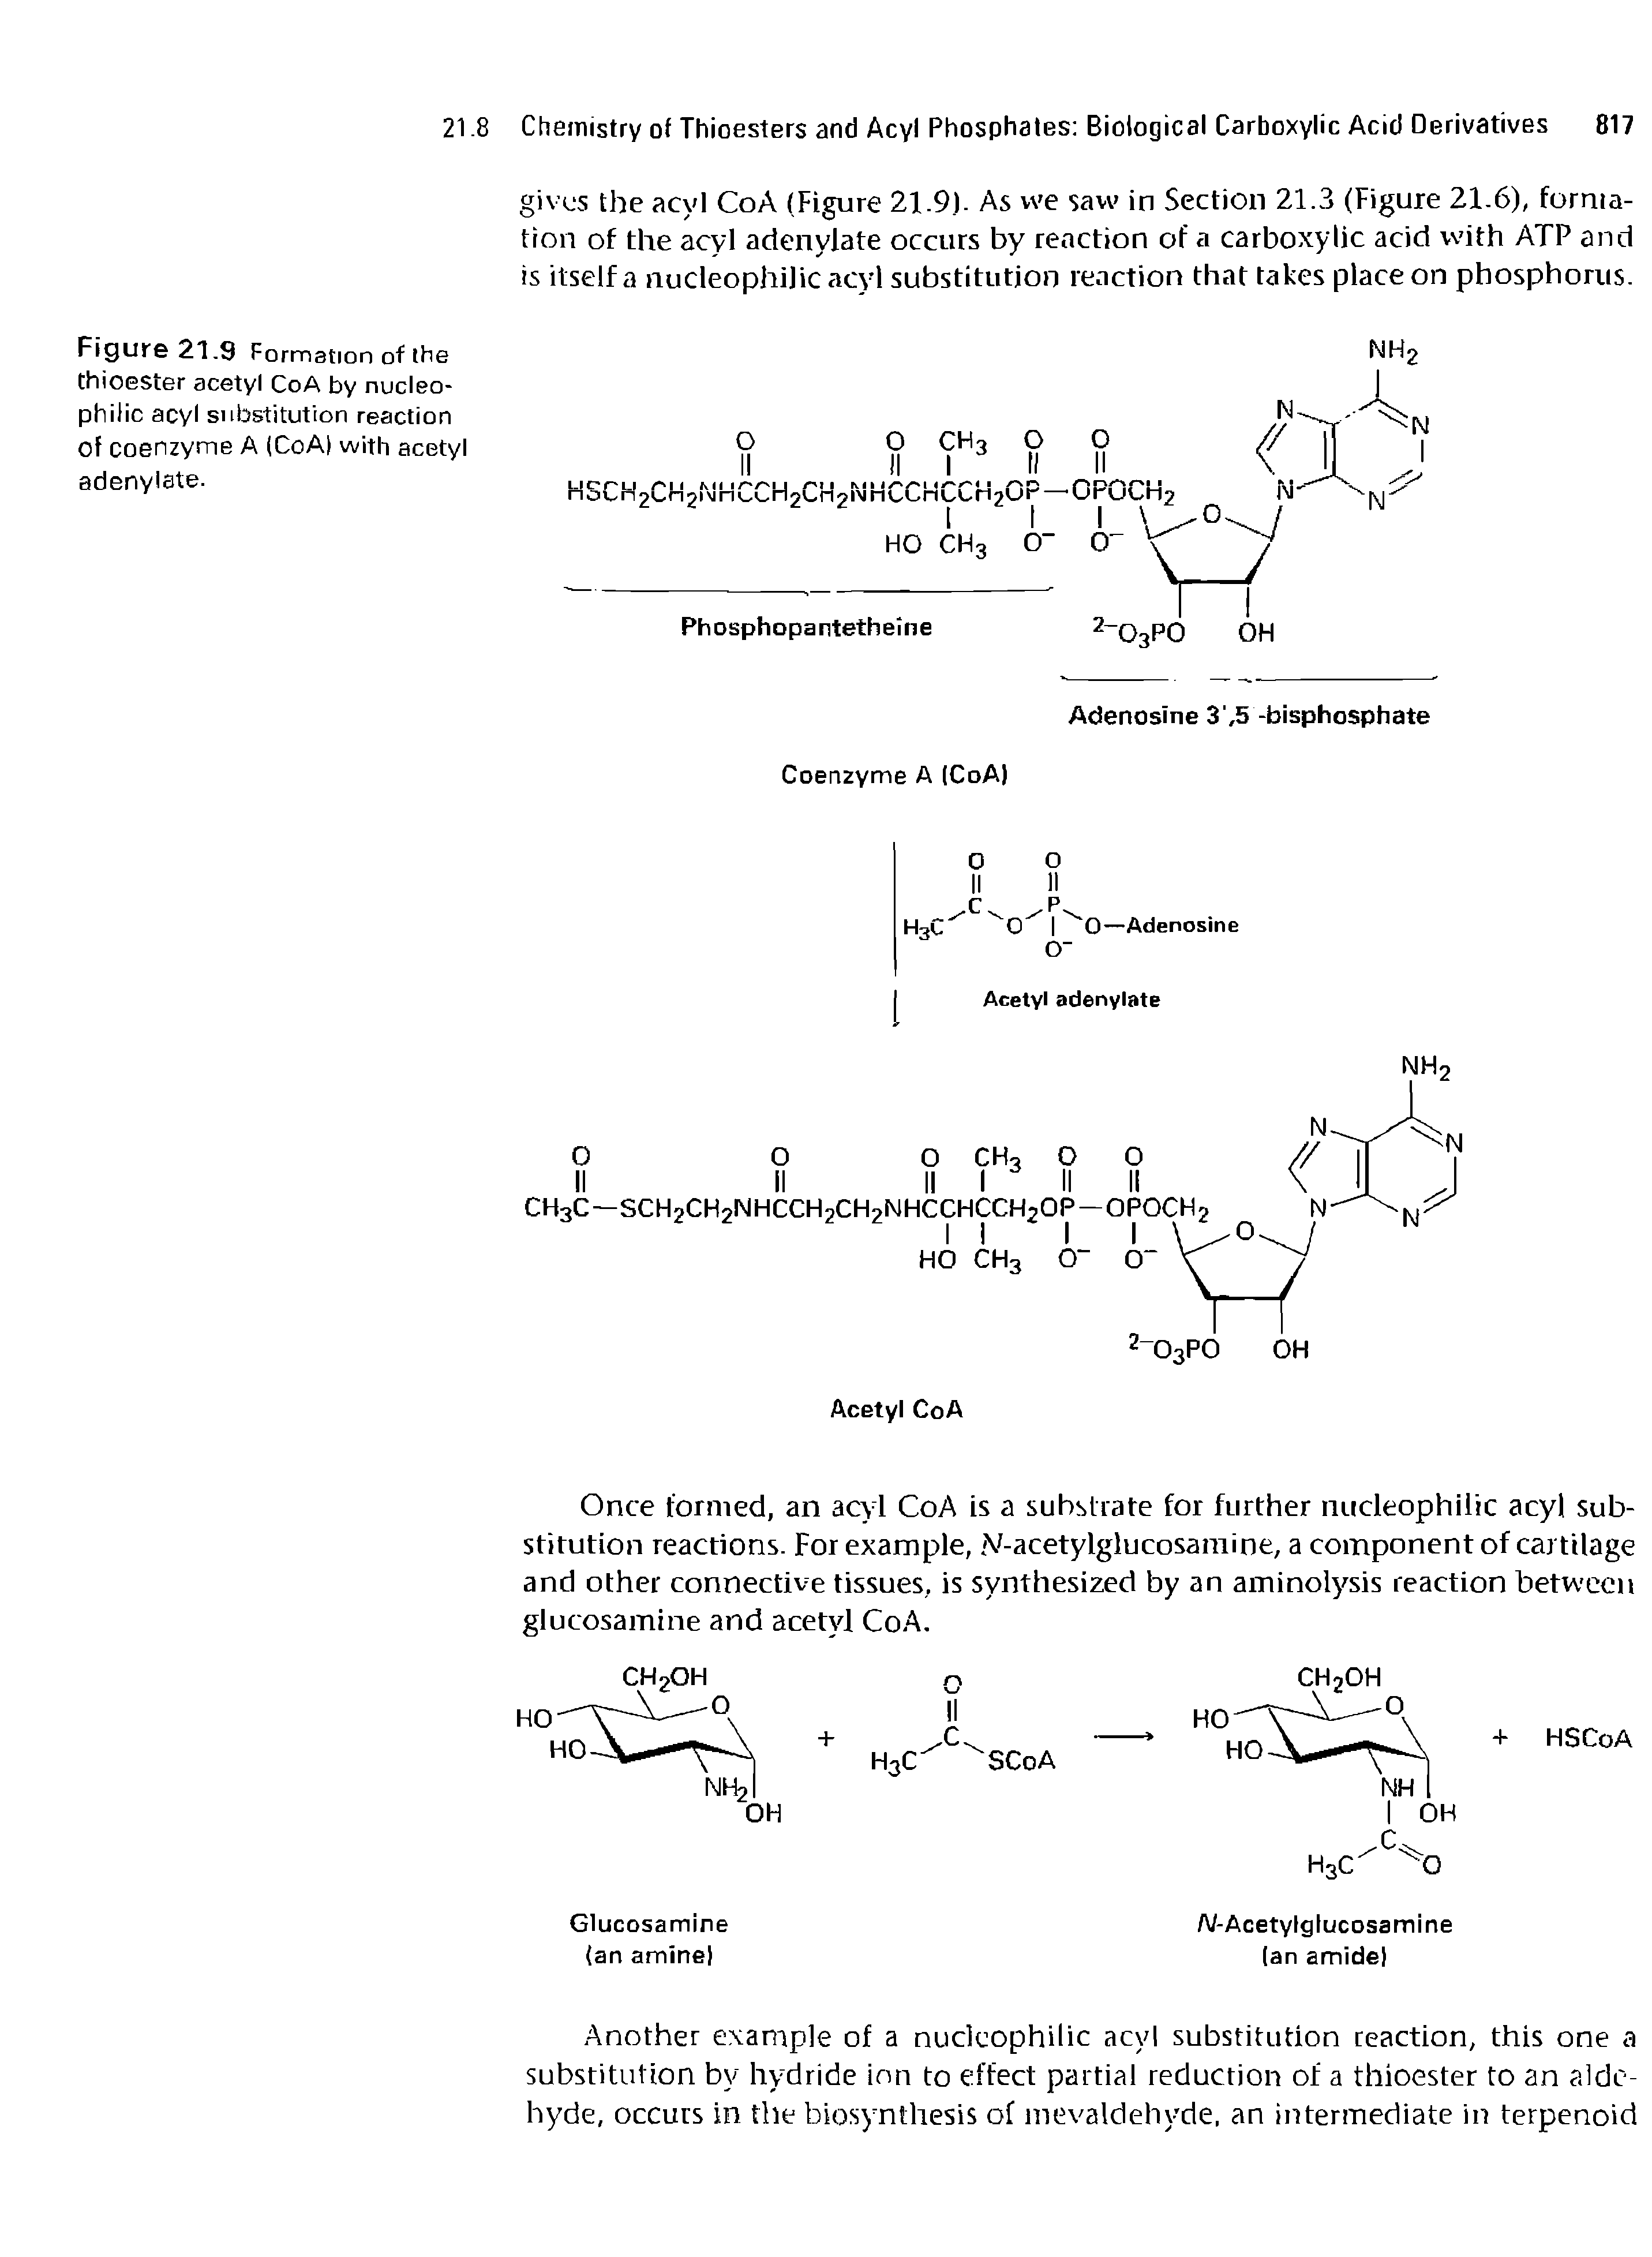 Figure 21.9 Formation of the thioester acetyl CoA by nucleophilic acyl substitution reaction of coenzyme A (CoA with acetyl adenylate.